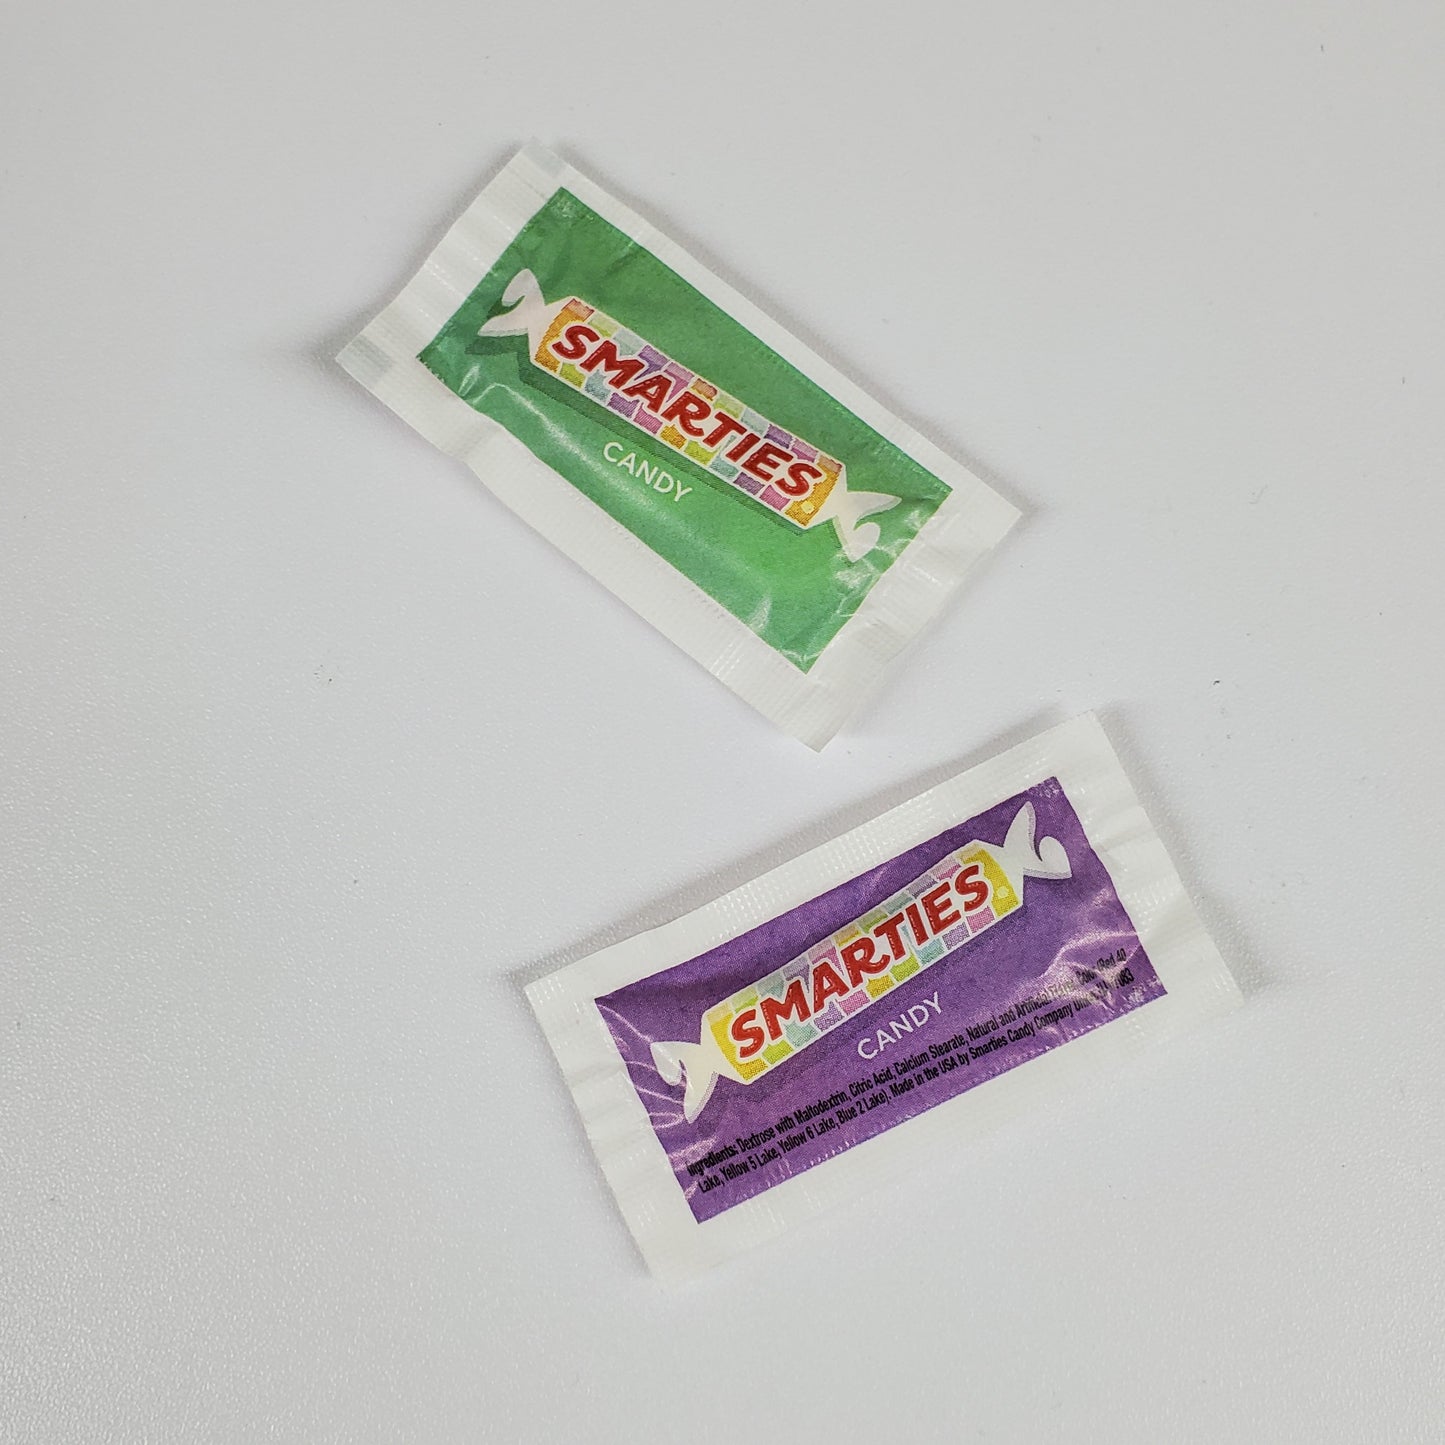 Small packages of Smarties containing 3 pieces of candy